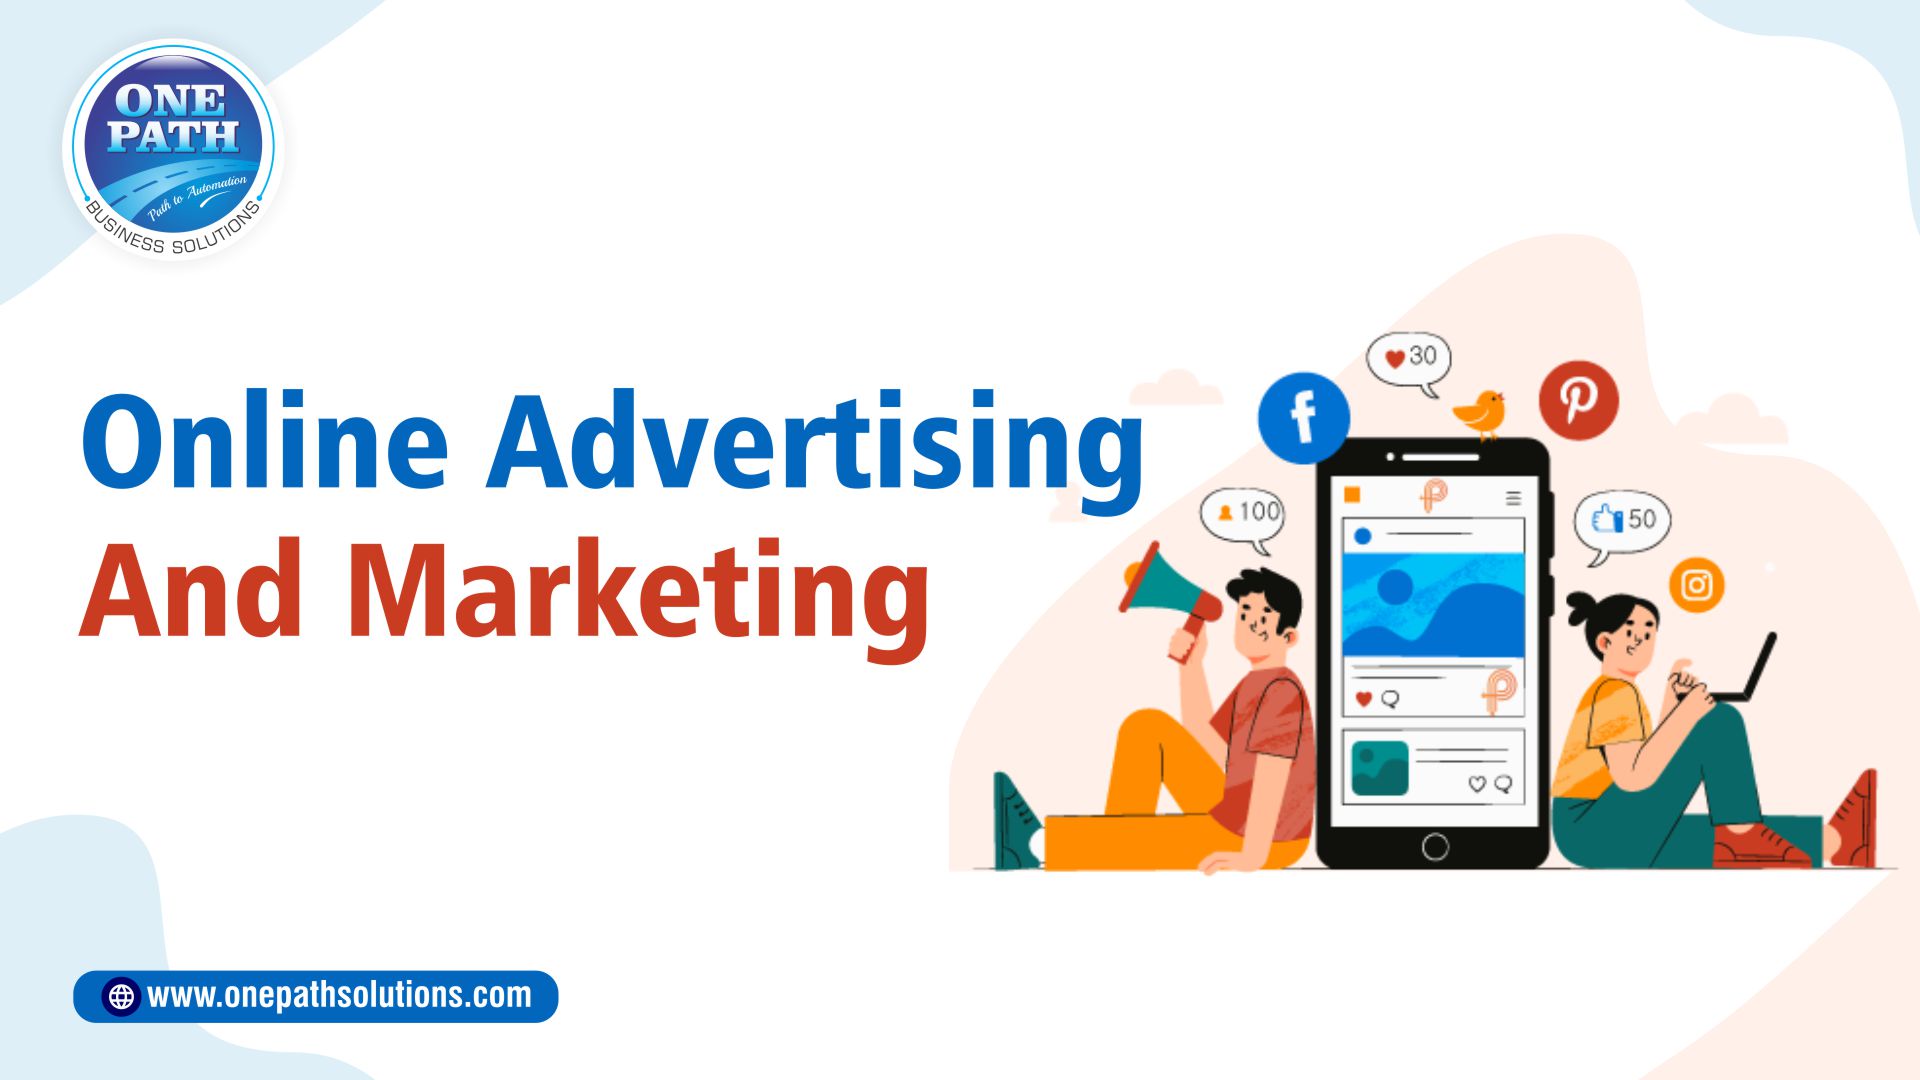 Online advertising and Marketing